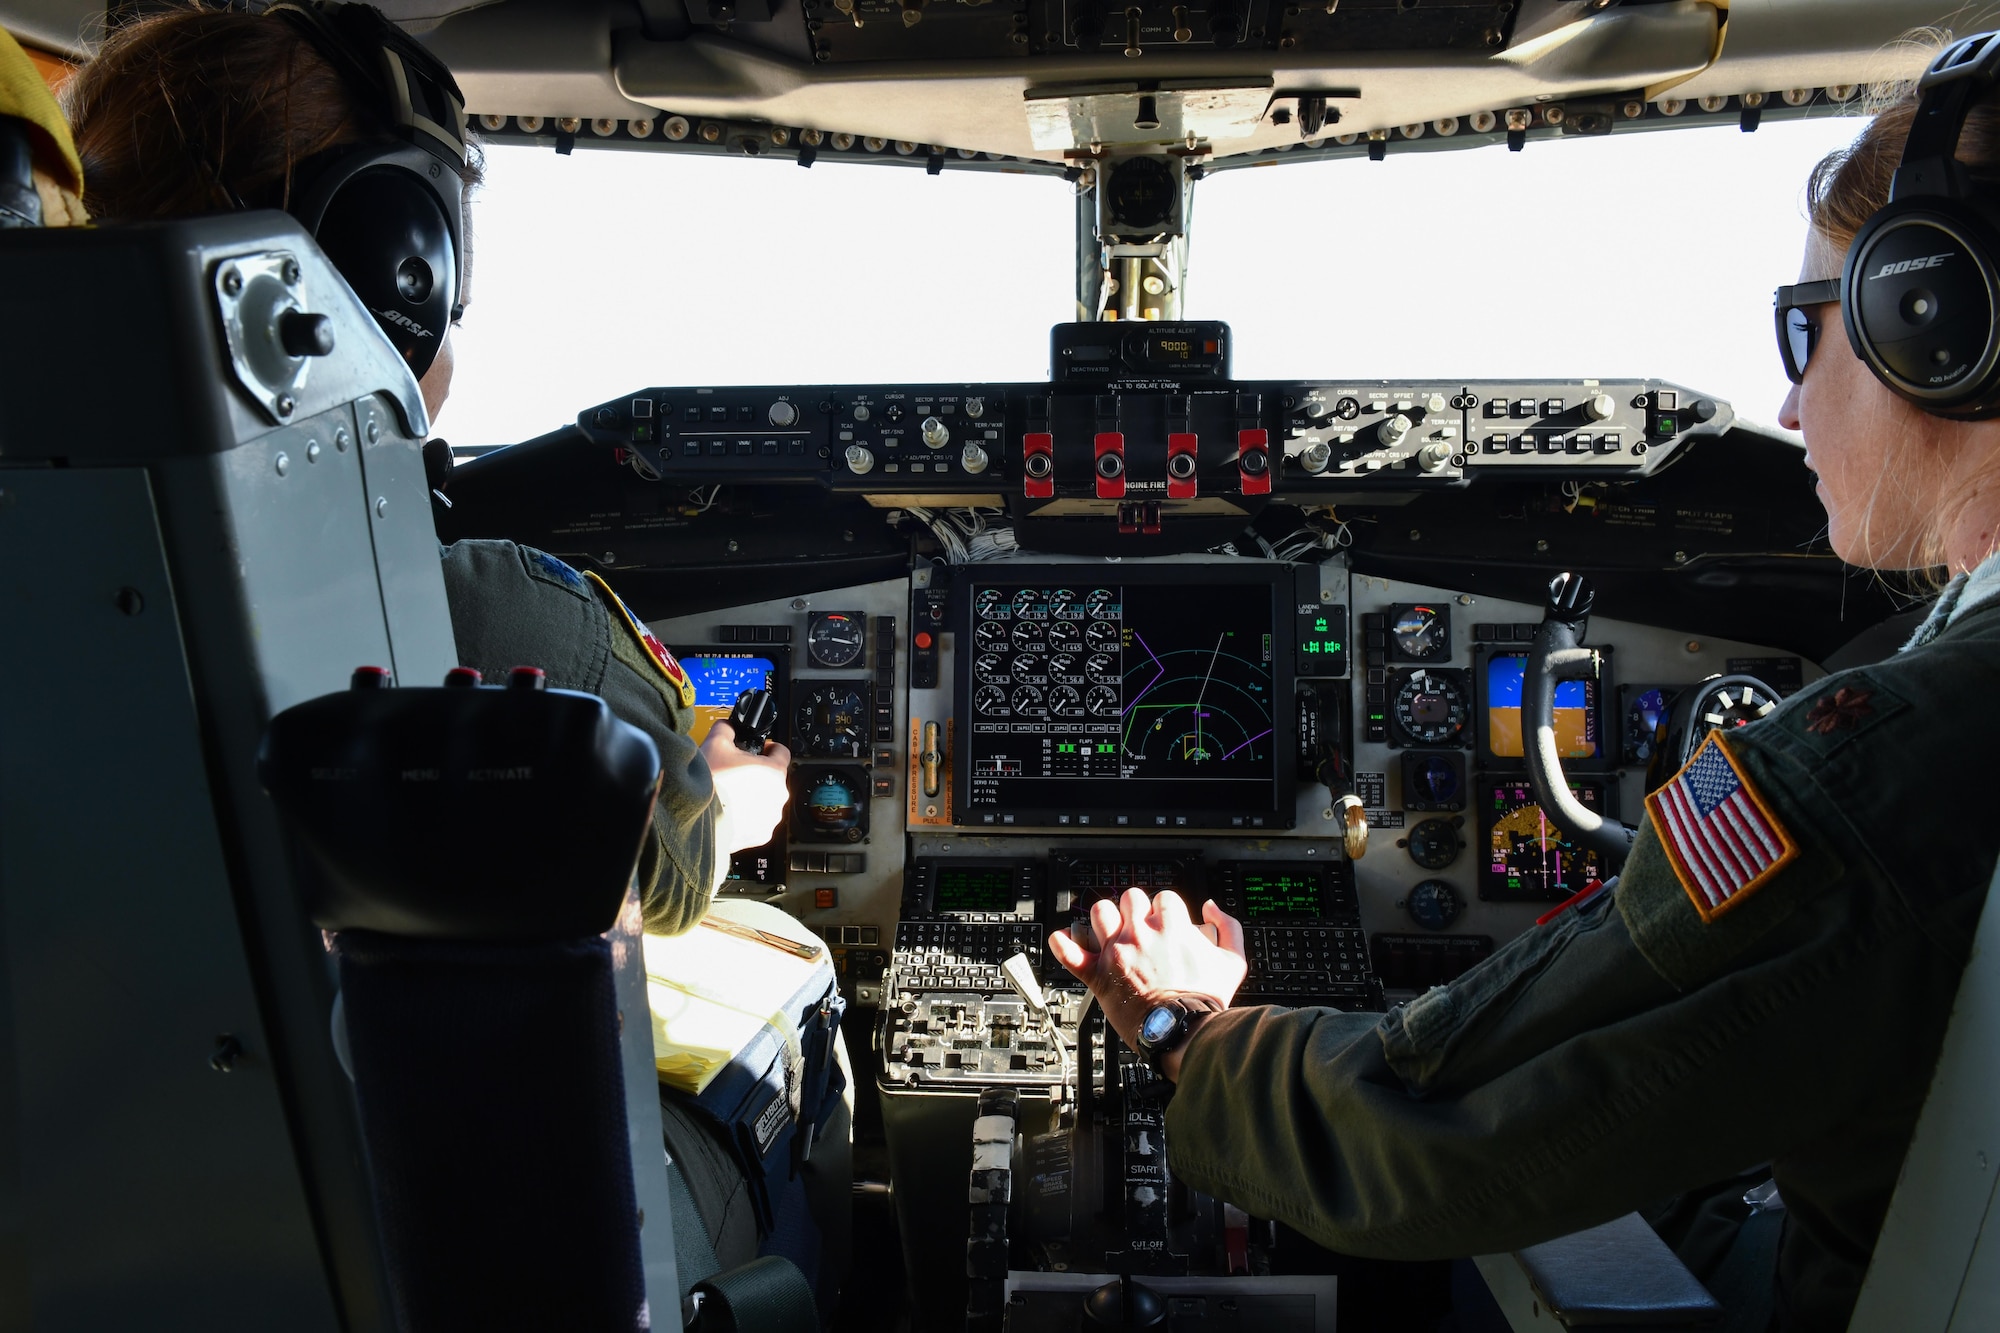 U.S. Air Force Lt. Col. Sarah Bulinski (left), 54th Air Refueling Squadron (ARS) commander, and Maj. Aimee Parenti, 54th ARS instructor pilot, taxi a KC-135 Stratotanker at Altus Air Force Base, Oklahoma, March 28, 2023. Women make up about seven percent of pilots in the Air Force. (U.S. Air Force photo by Airman 1st Class Miyah Gray)